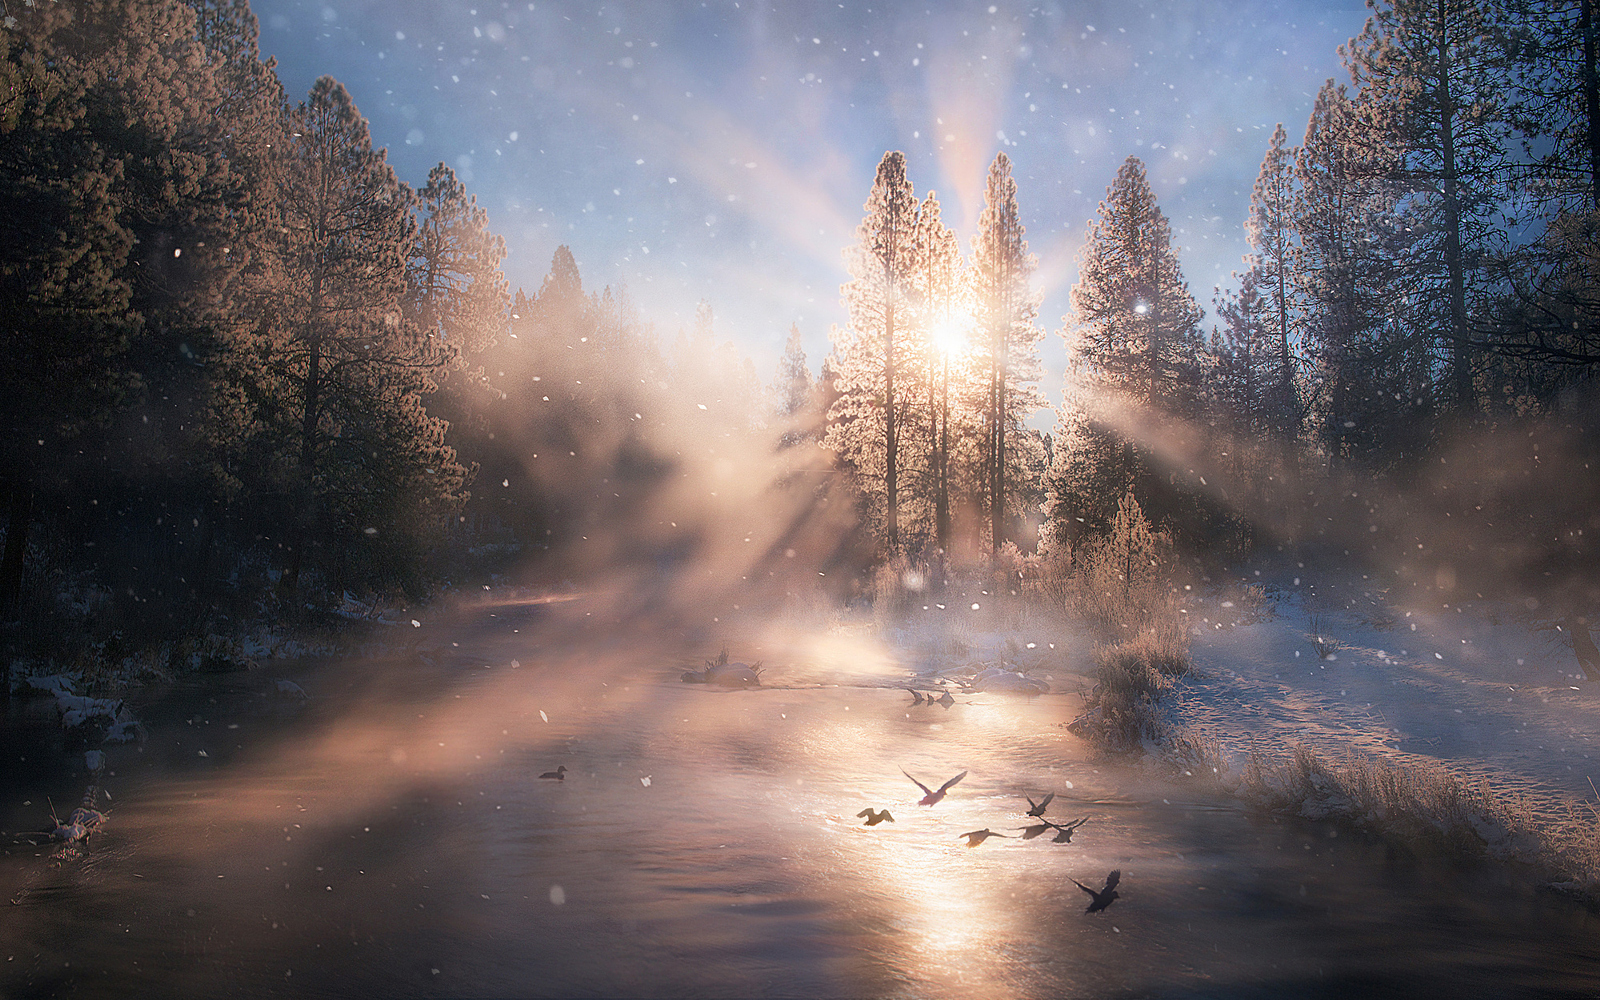 500px Top Landscape Photos On So Far This Year